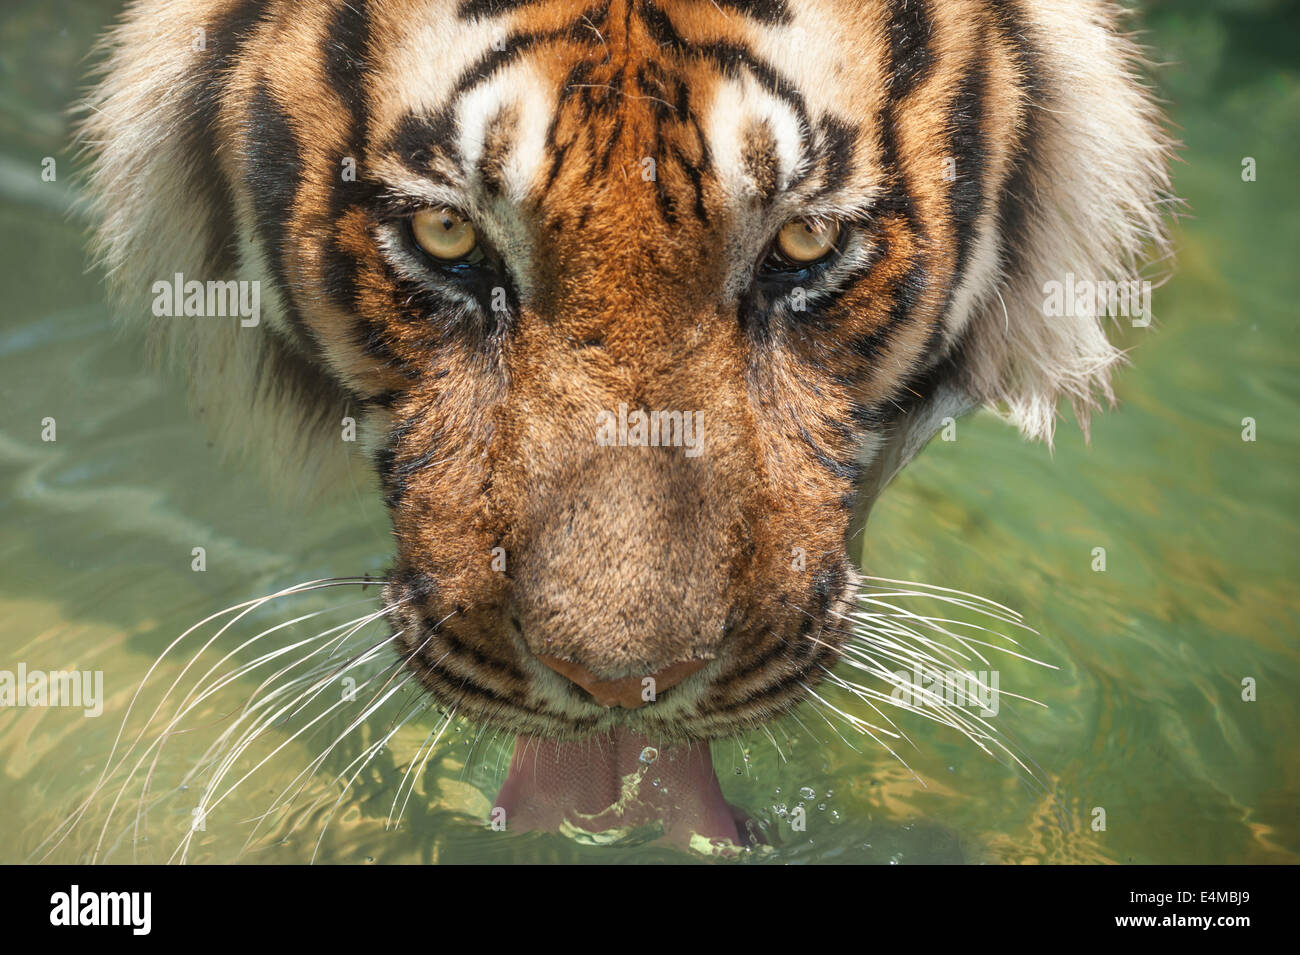 Captive Bengal Tiger drinking water from pool Stock Photo